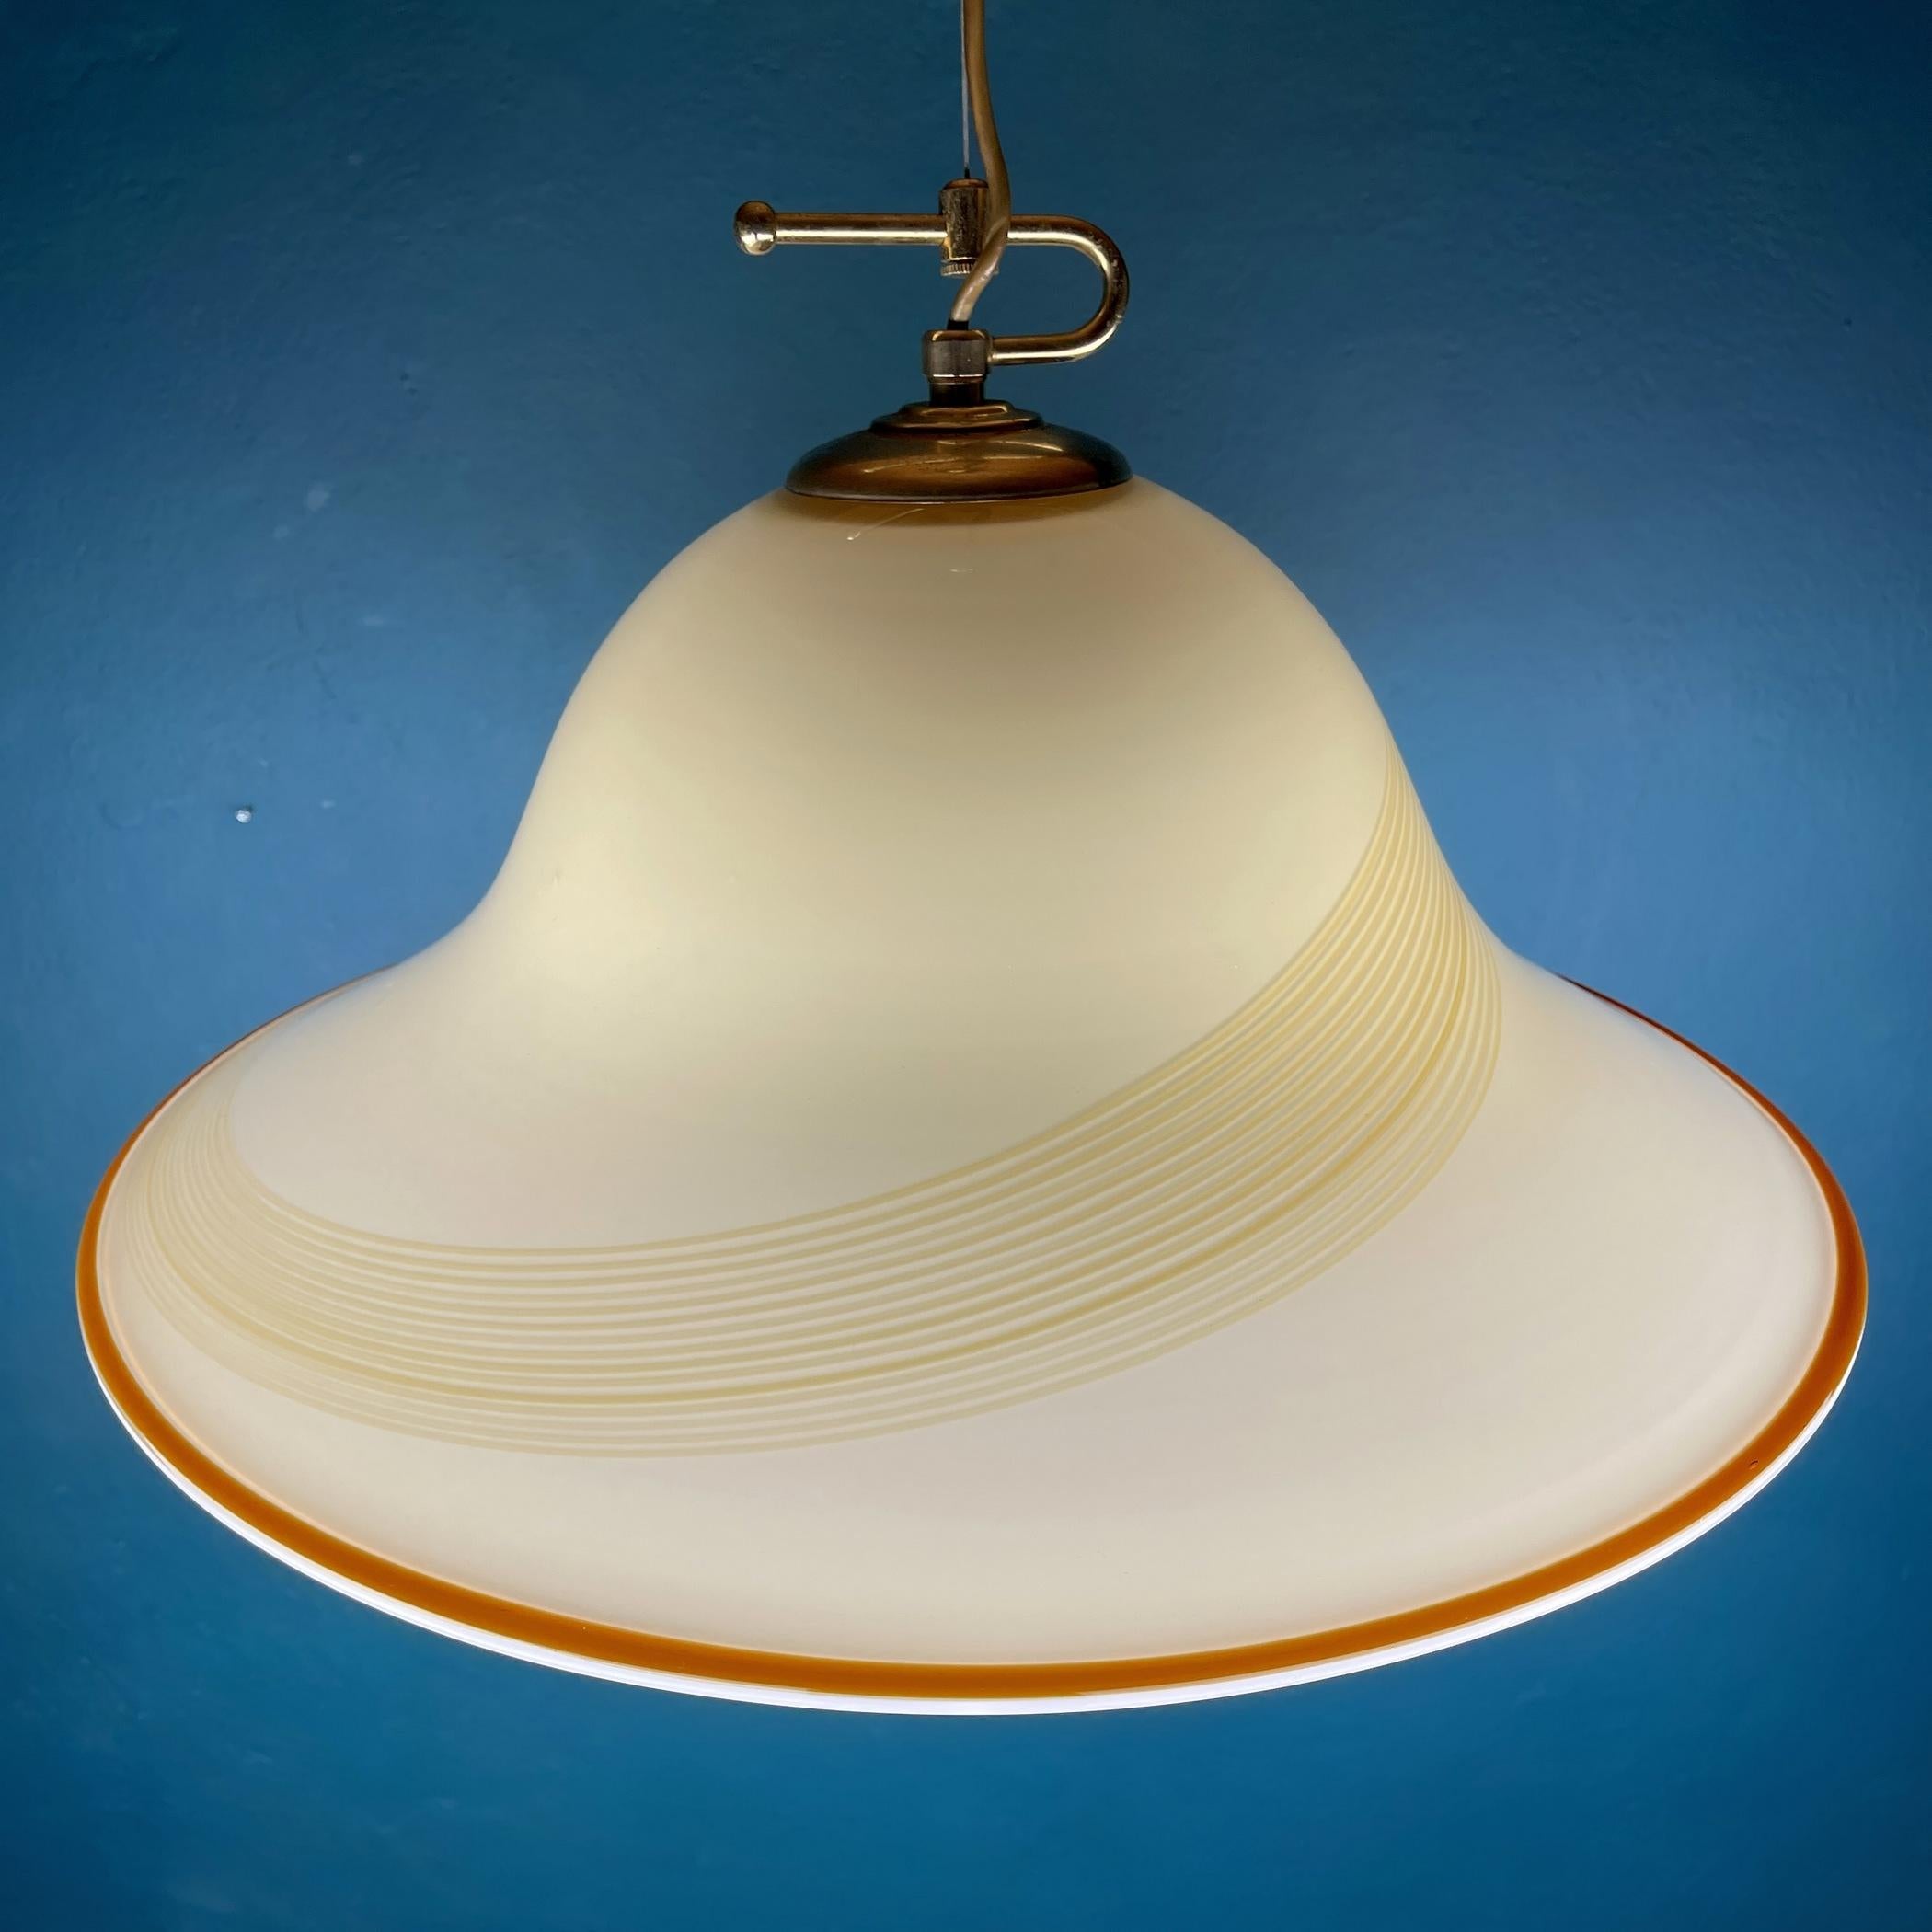 Vintage Beige Murano Glass Pendant Lamp by De Majo, Italy, 1970s For Sale 7